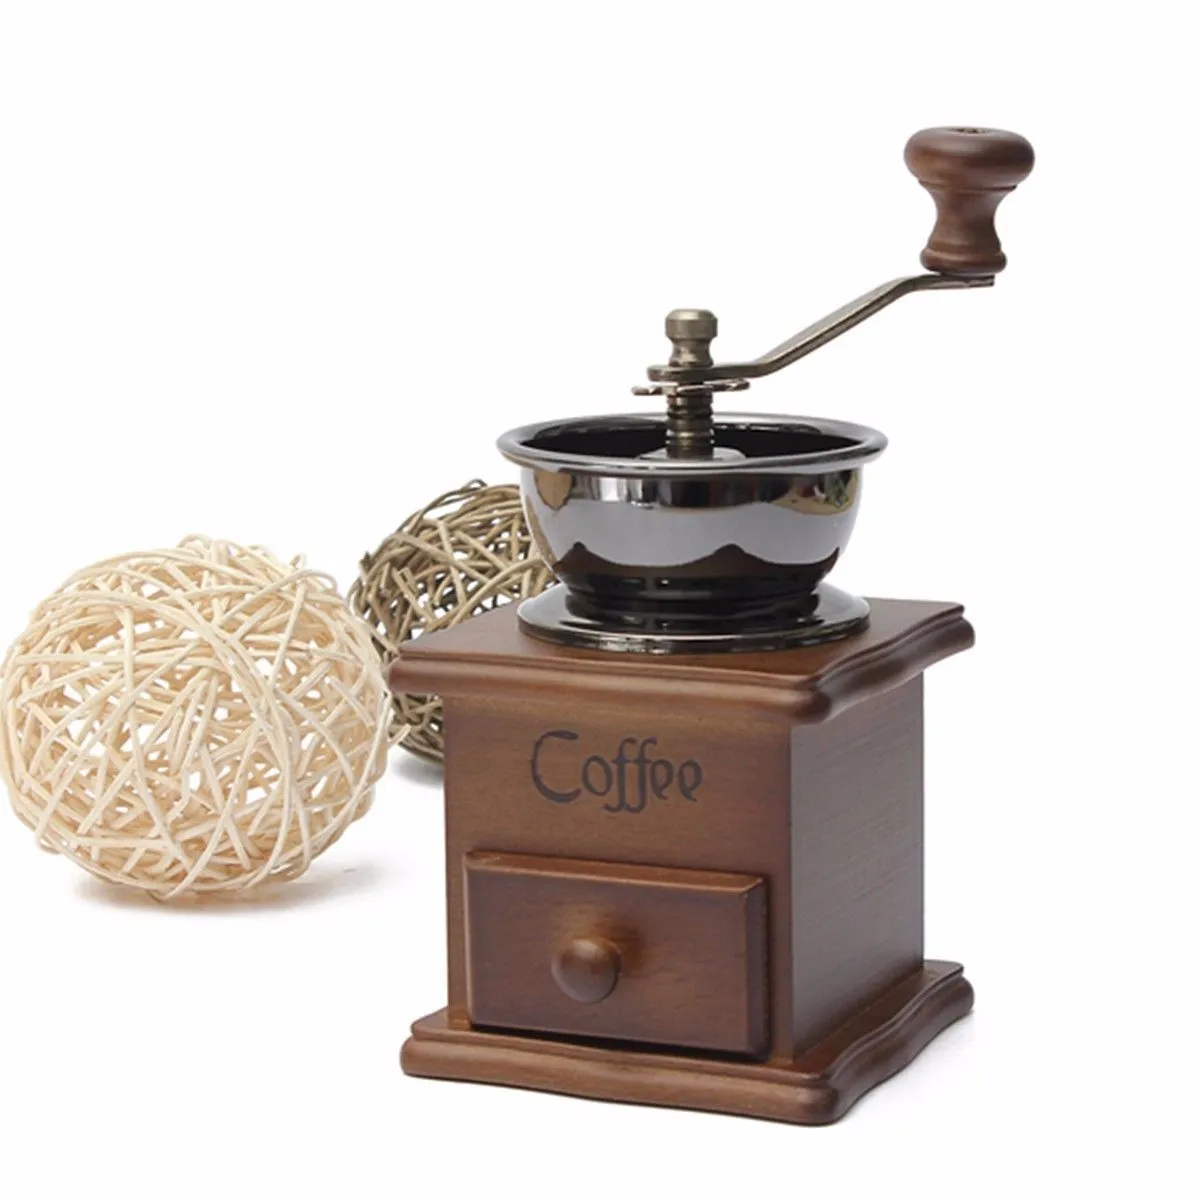 Classical Wooden mills Manual Coffee Grinder Stainless Steel Retro Coffee Spice Mini Burr Mill With Millstone